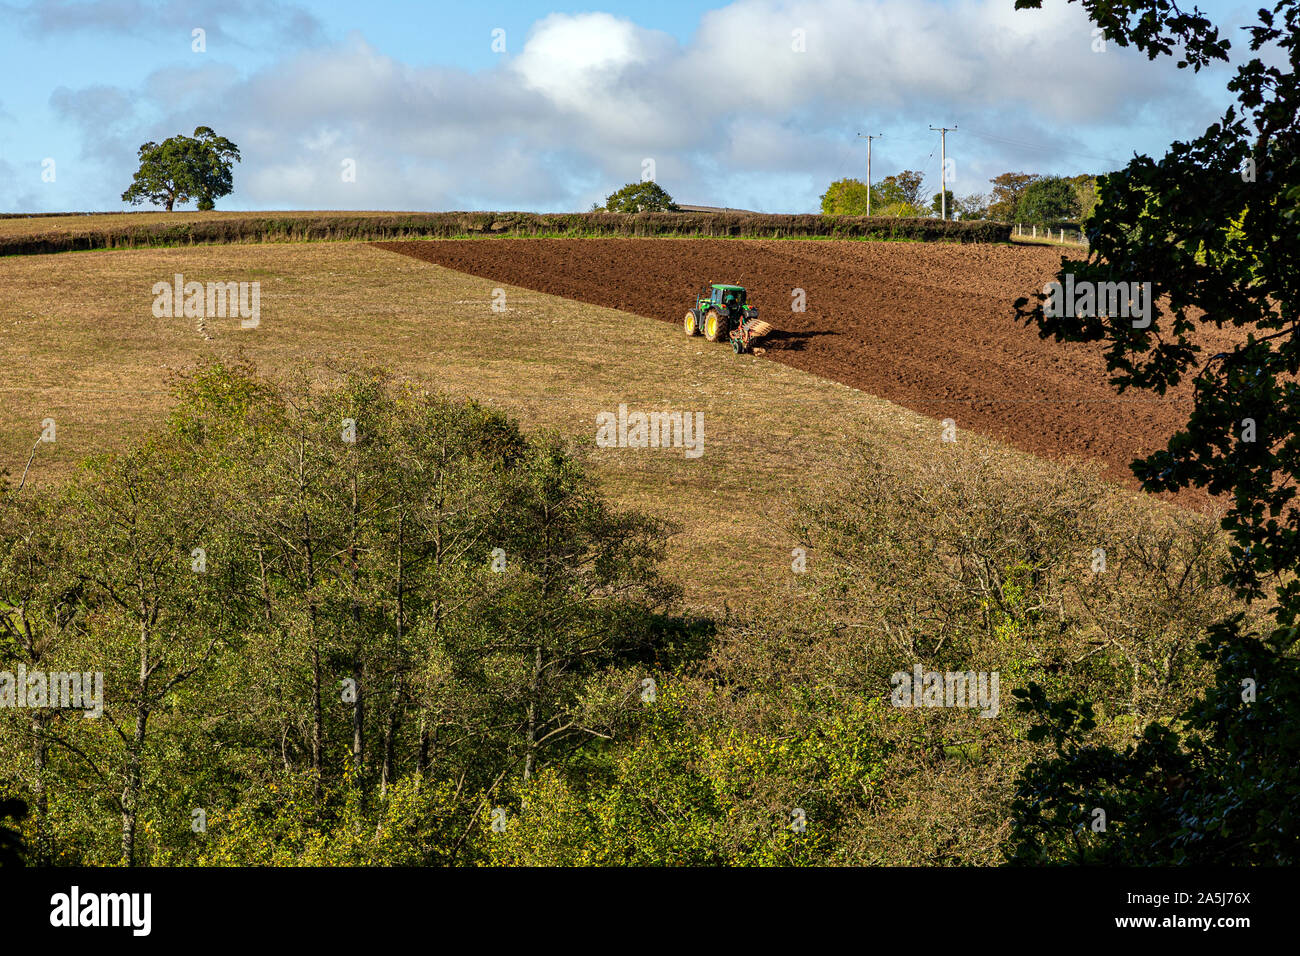 Agricultural Field, Farm, Seed, Sowing, Tractor, UK, England, Hill, In A Row, Organic, Planting, Agriculture, Bantham, Brown, Crop - Plant, Devon, Dir Stock Photo